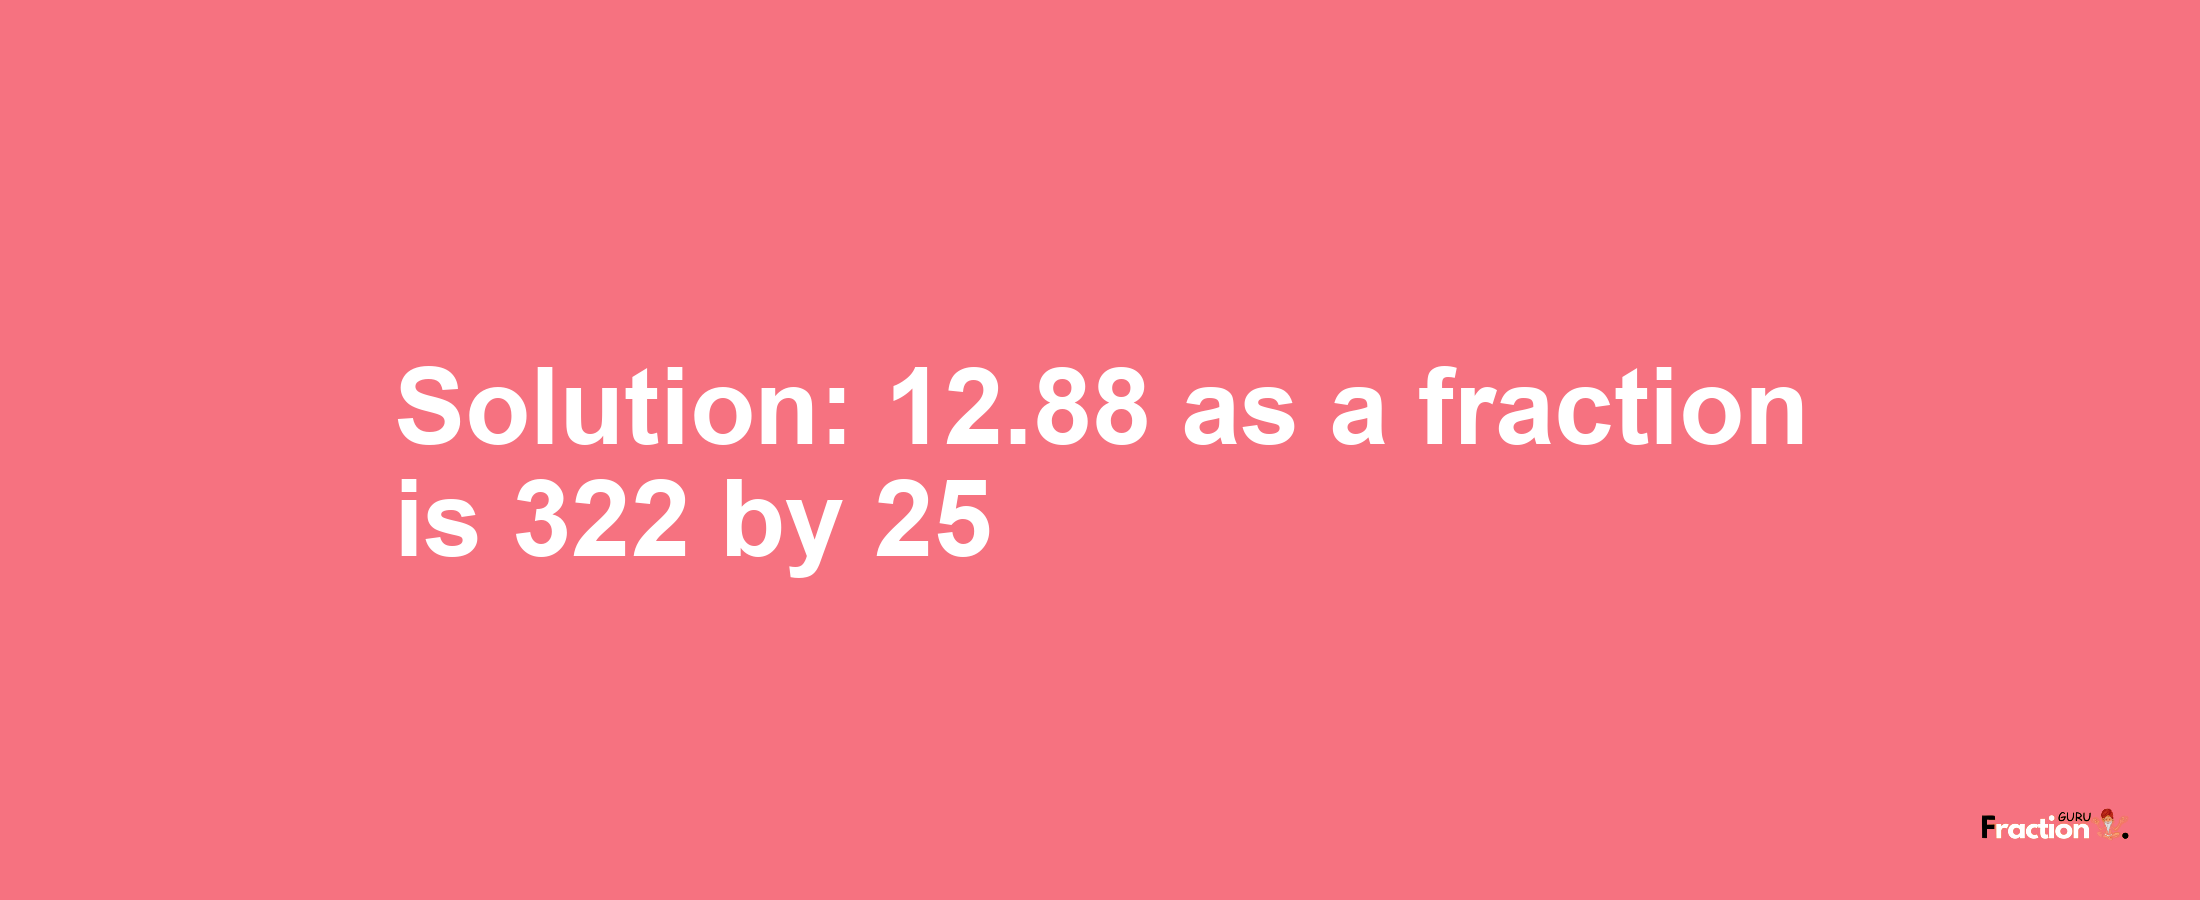 Solution:12.88 as a fraction is 322/25